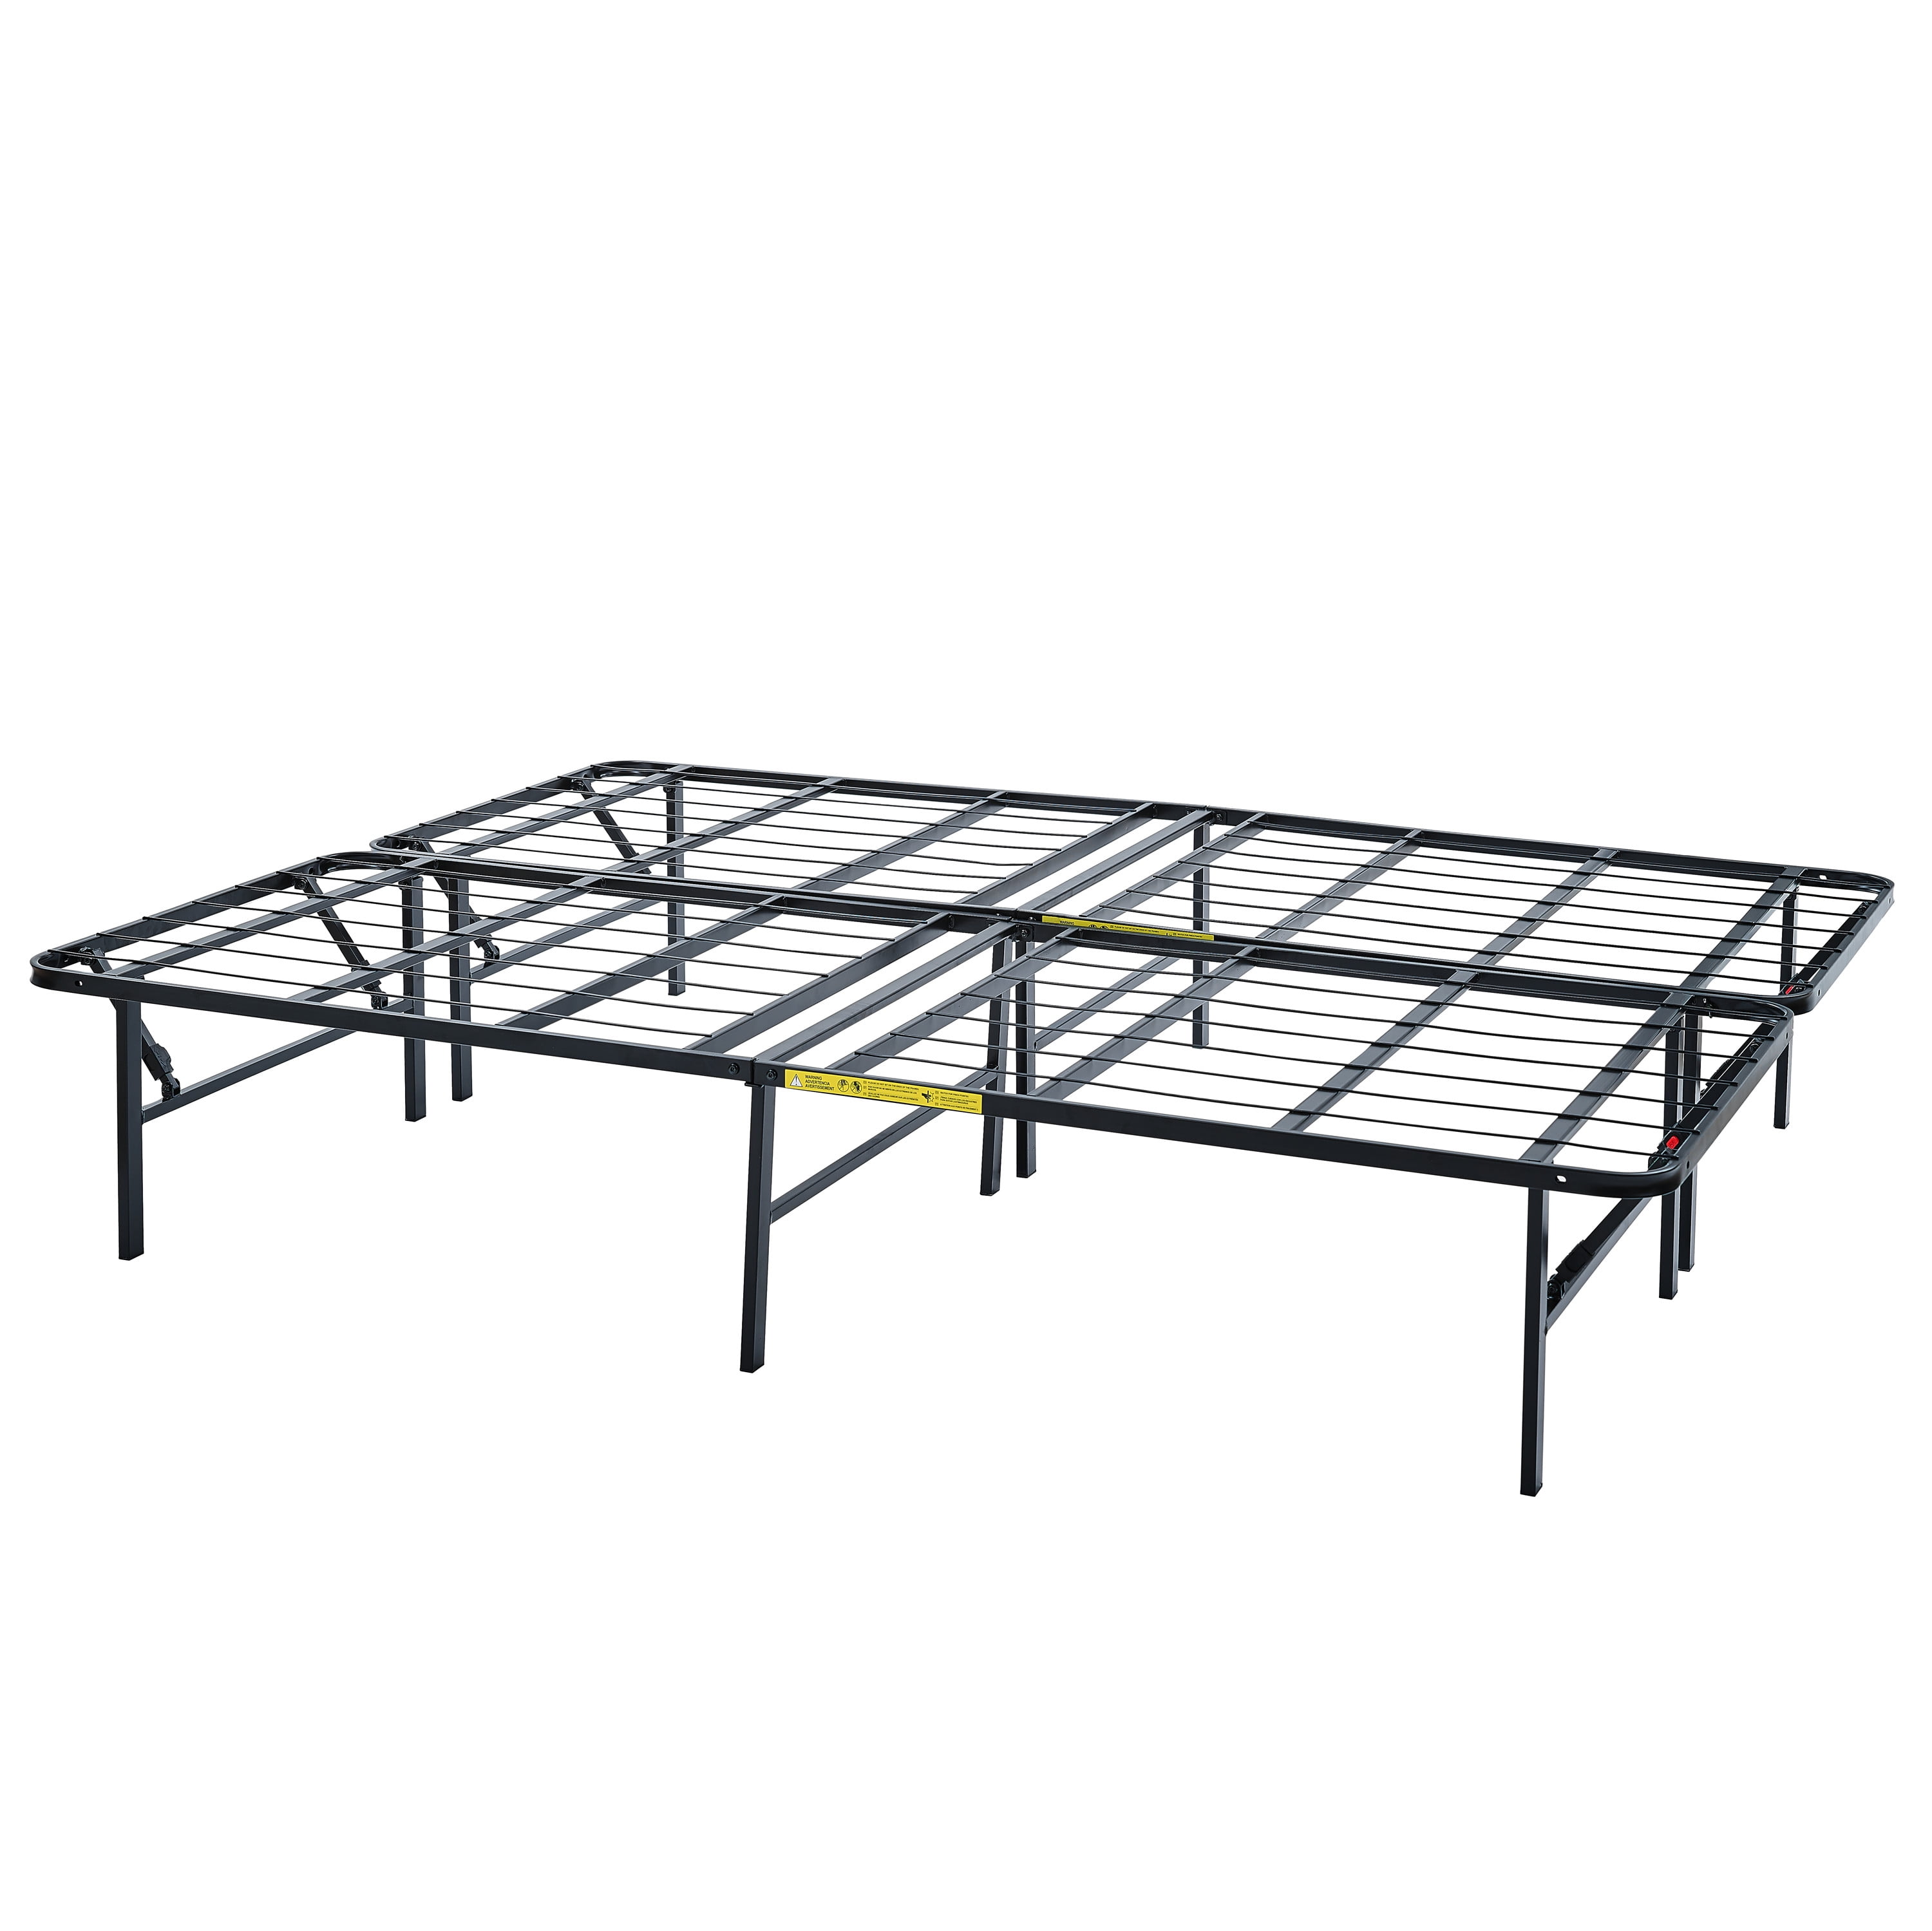 METAL PLATFORM BED FRAME QUEEN SIZE Tall 14 Inch Mattress Stand Hold 2400 lbs 